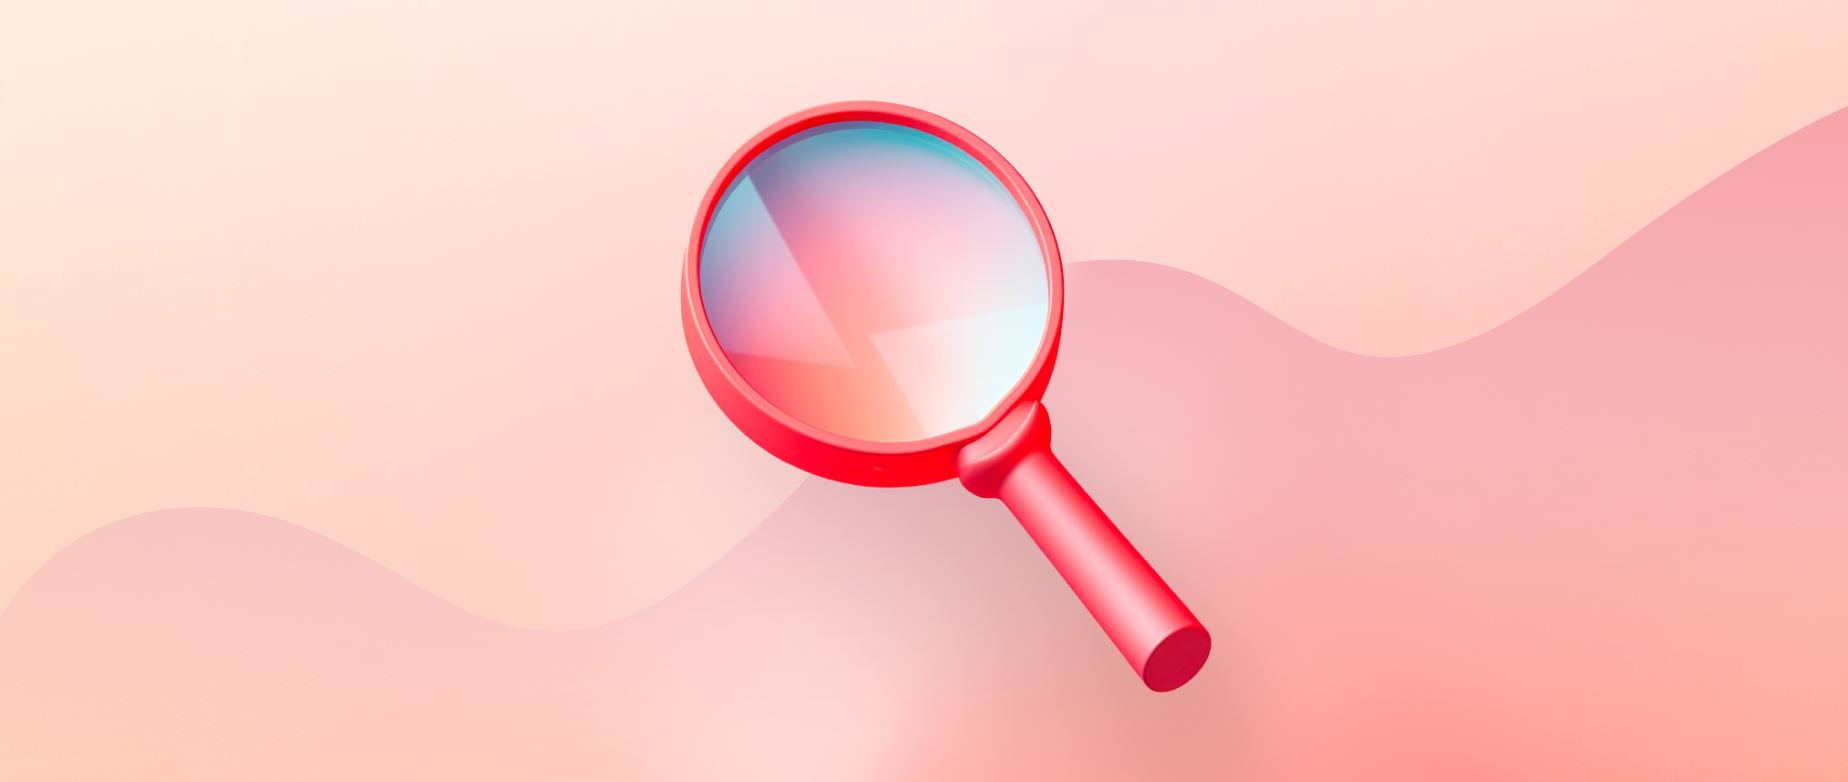 A red magnifying glass on a light red and peach background.